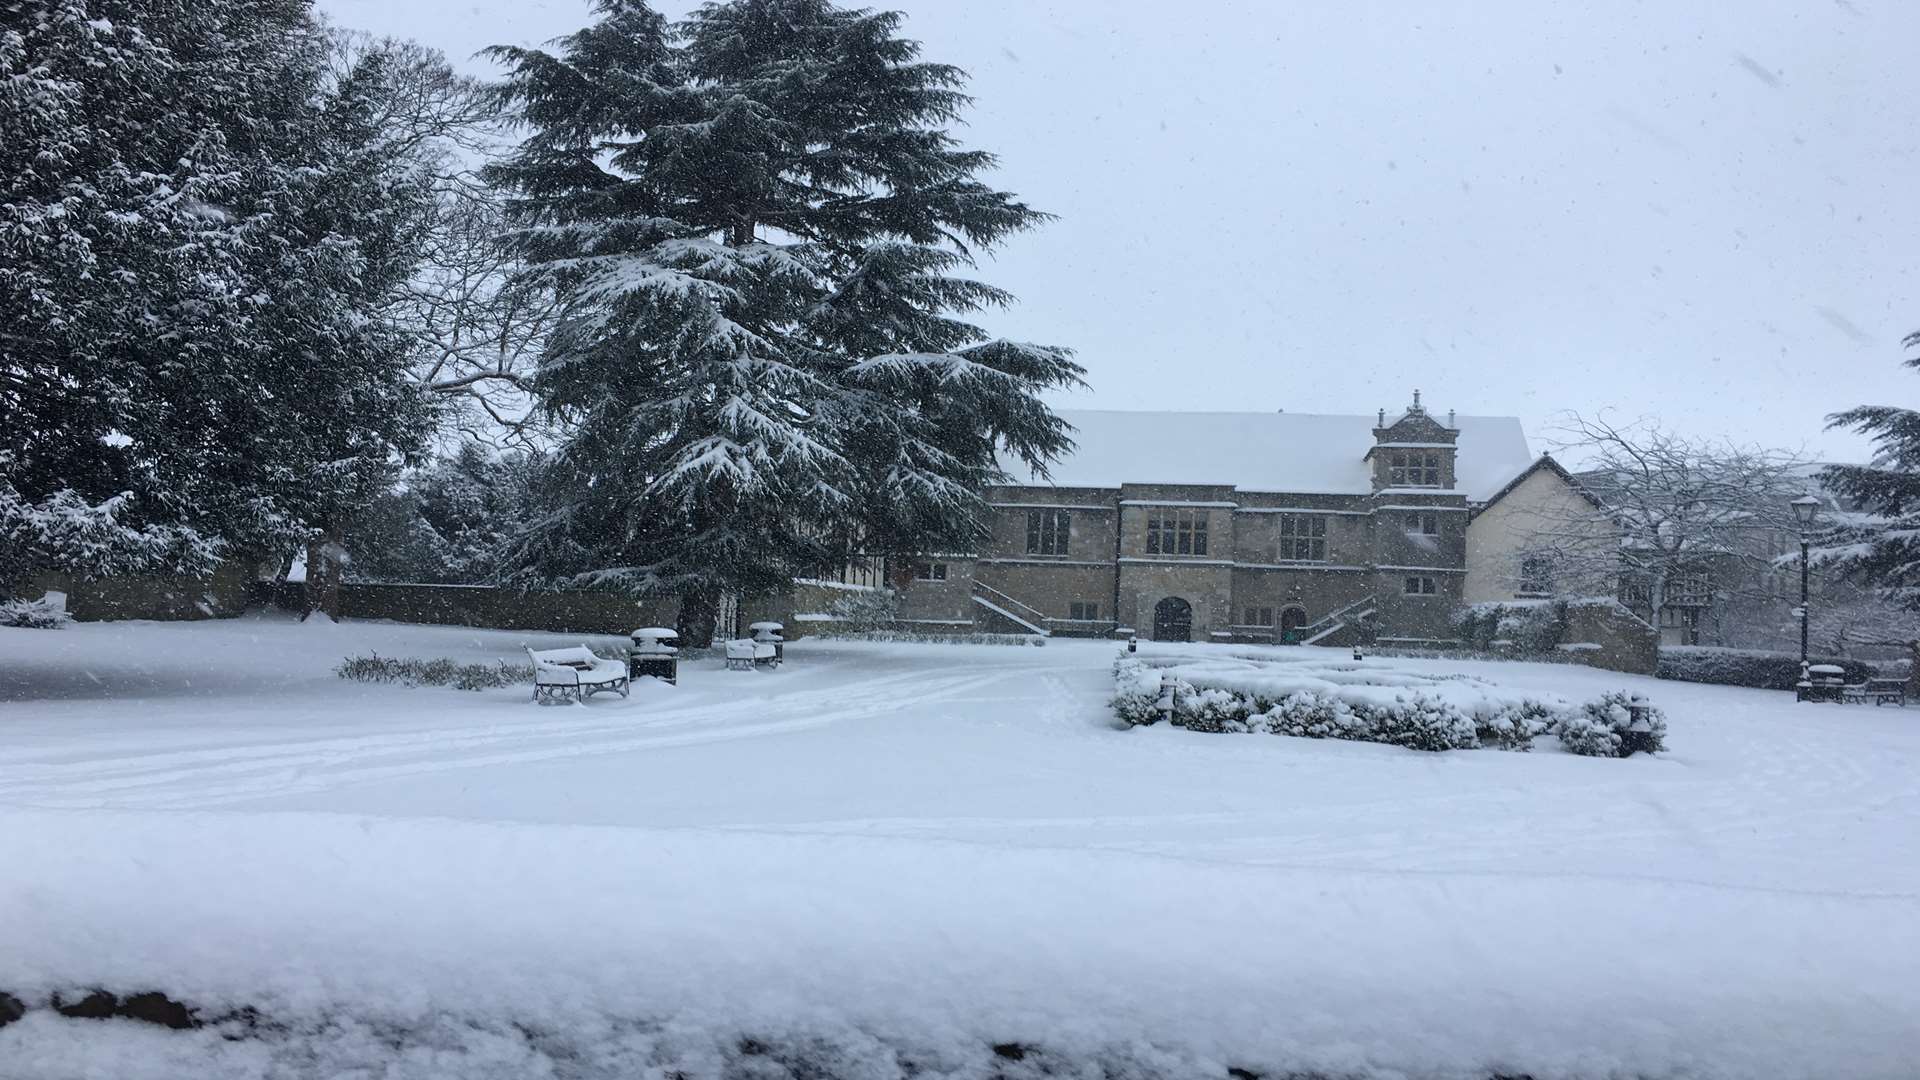 Archbishops Palace looked picture perfect amid the snowfall